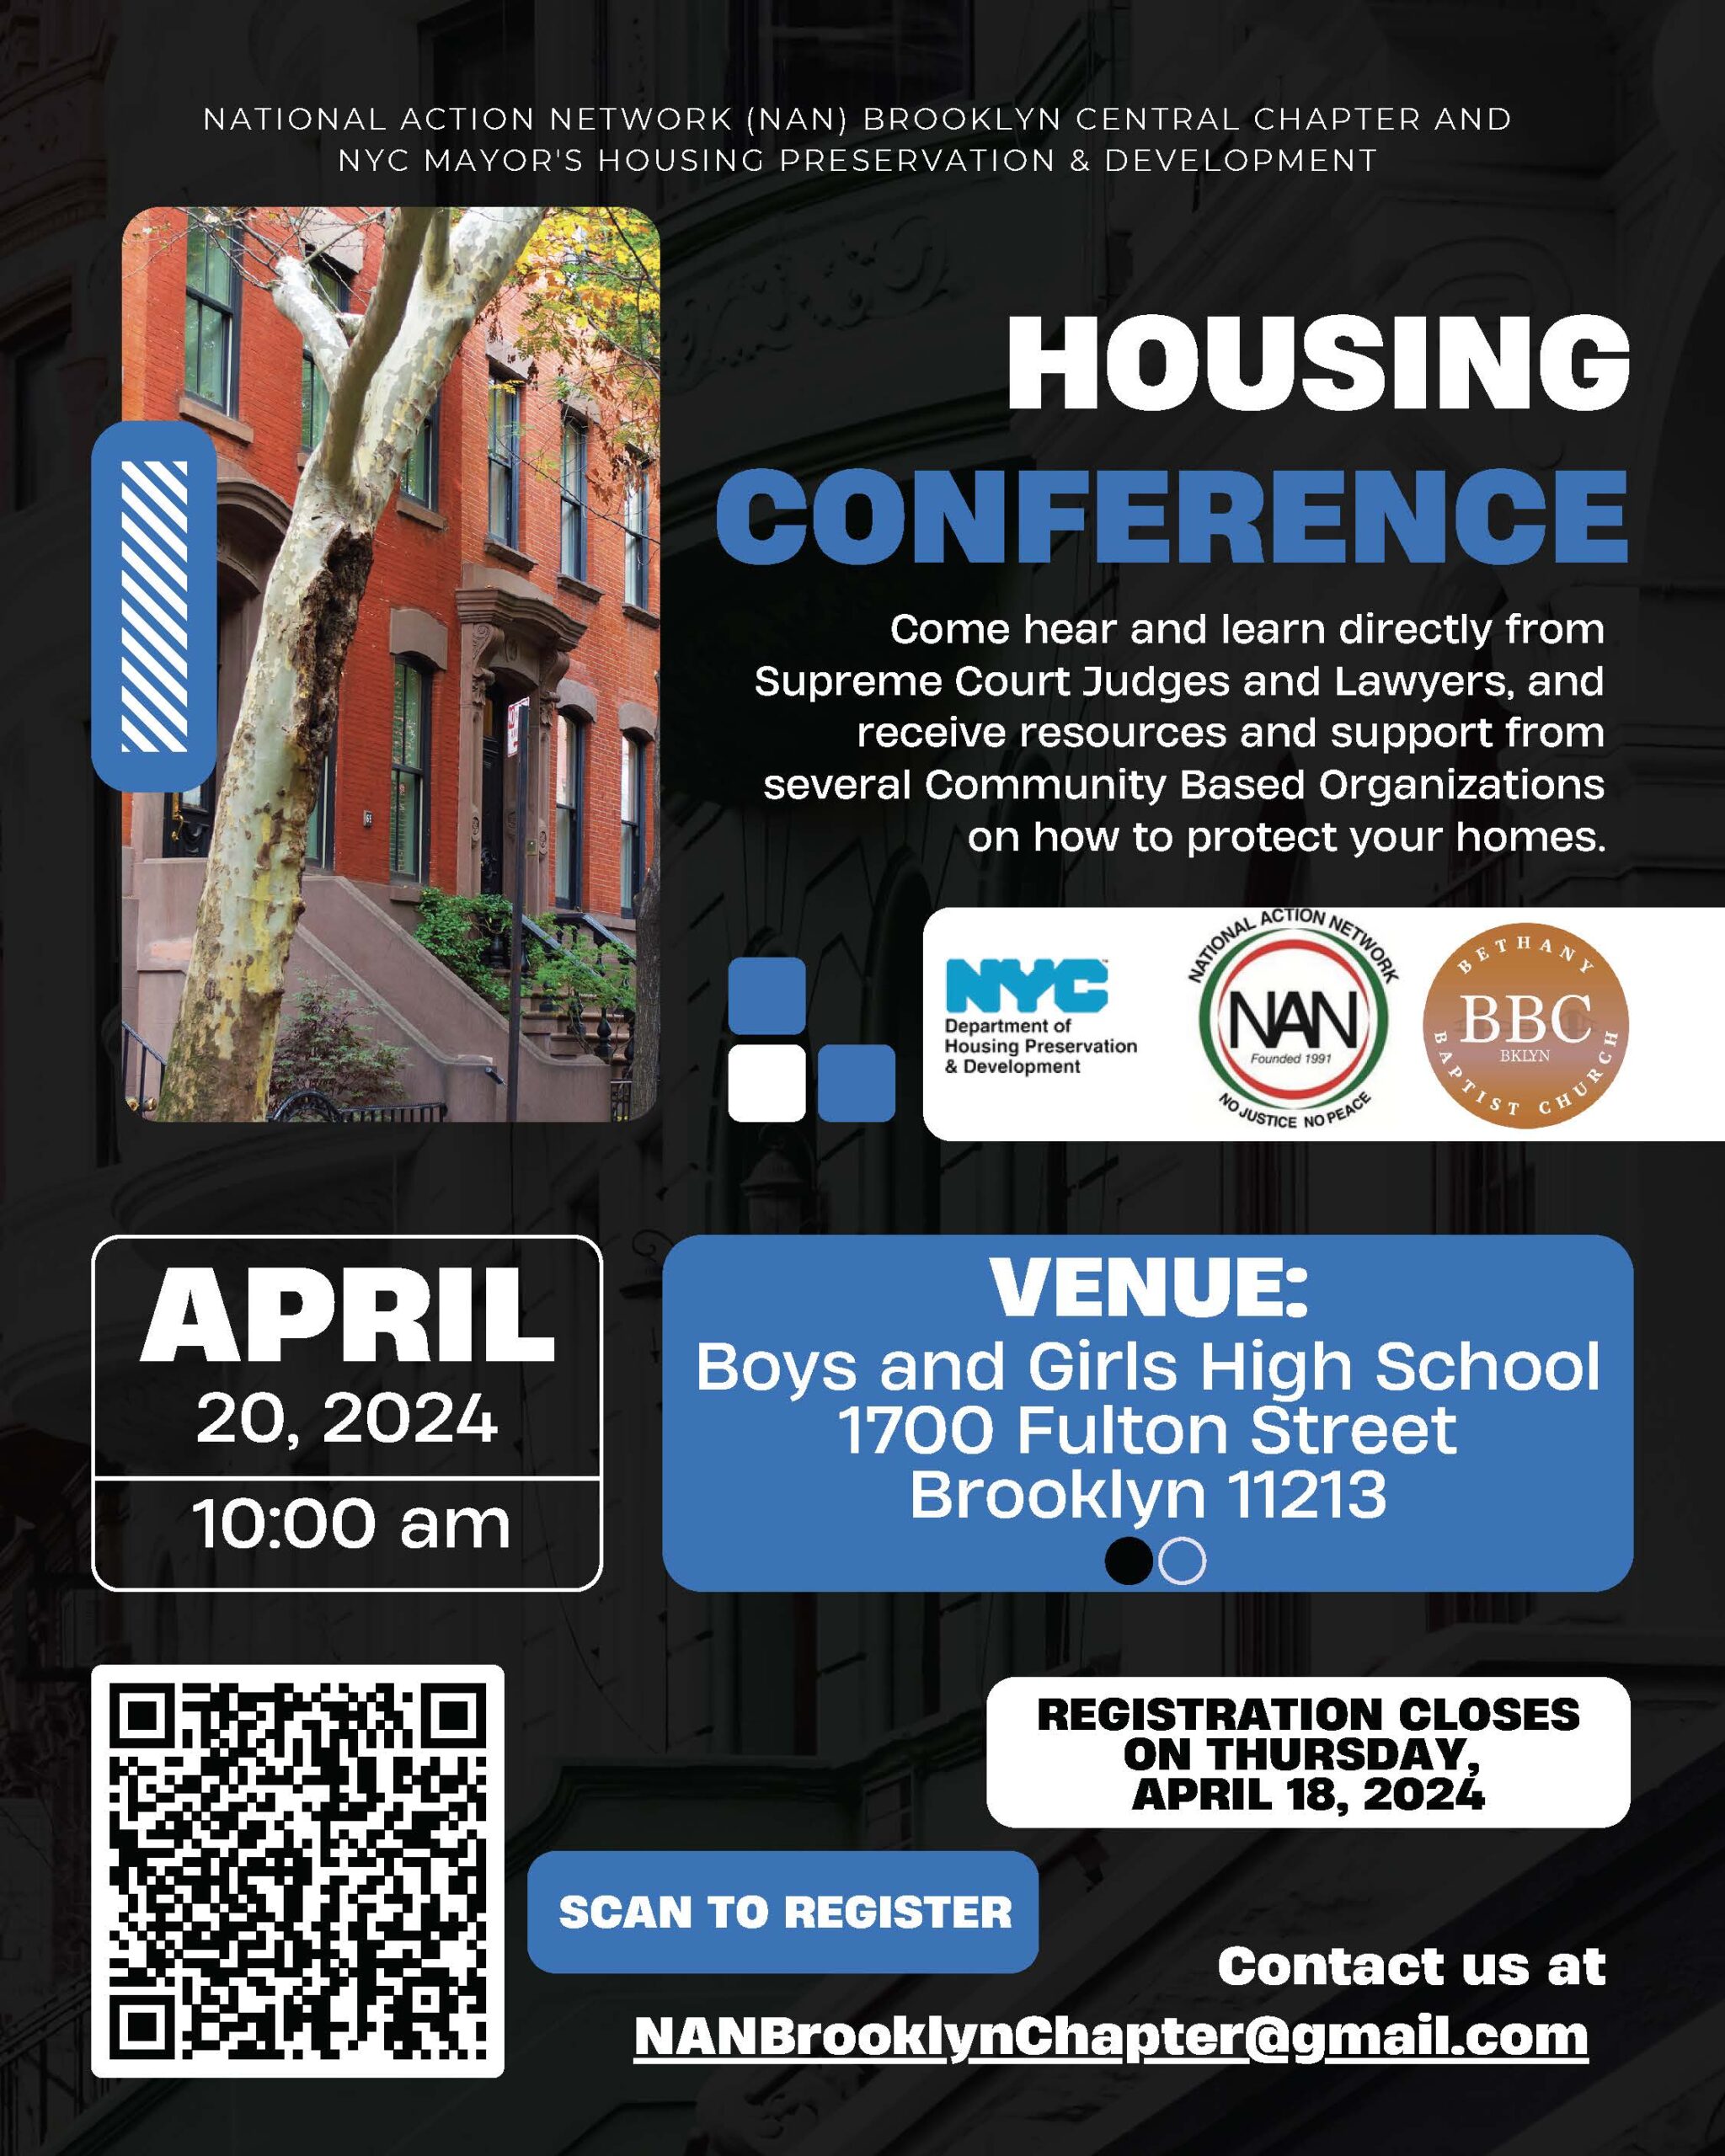 Housing-Conference-2-1.jpg